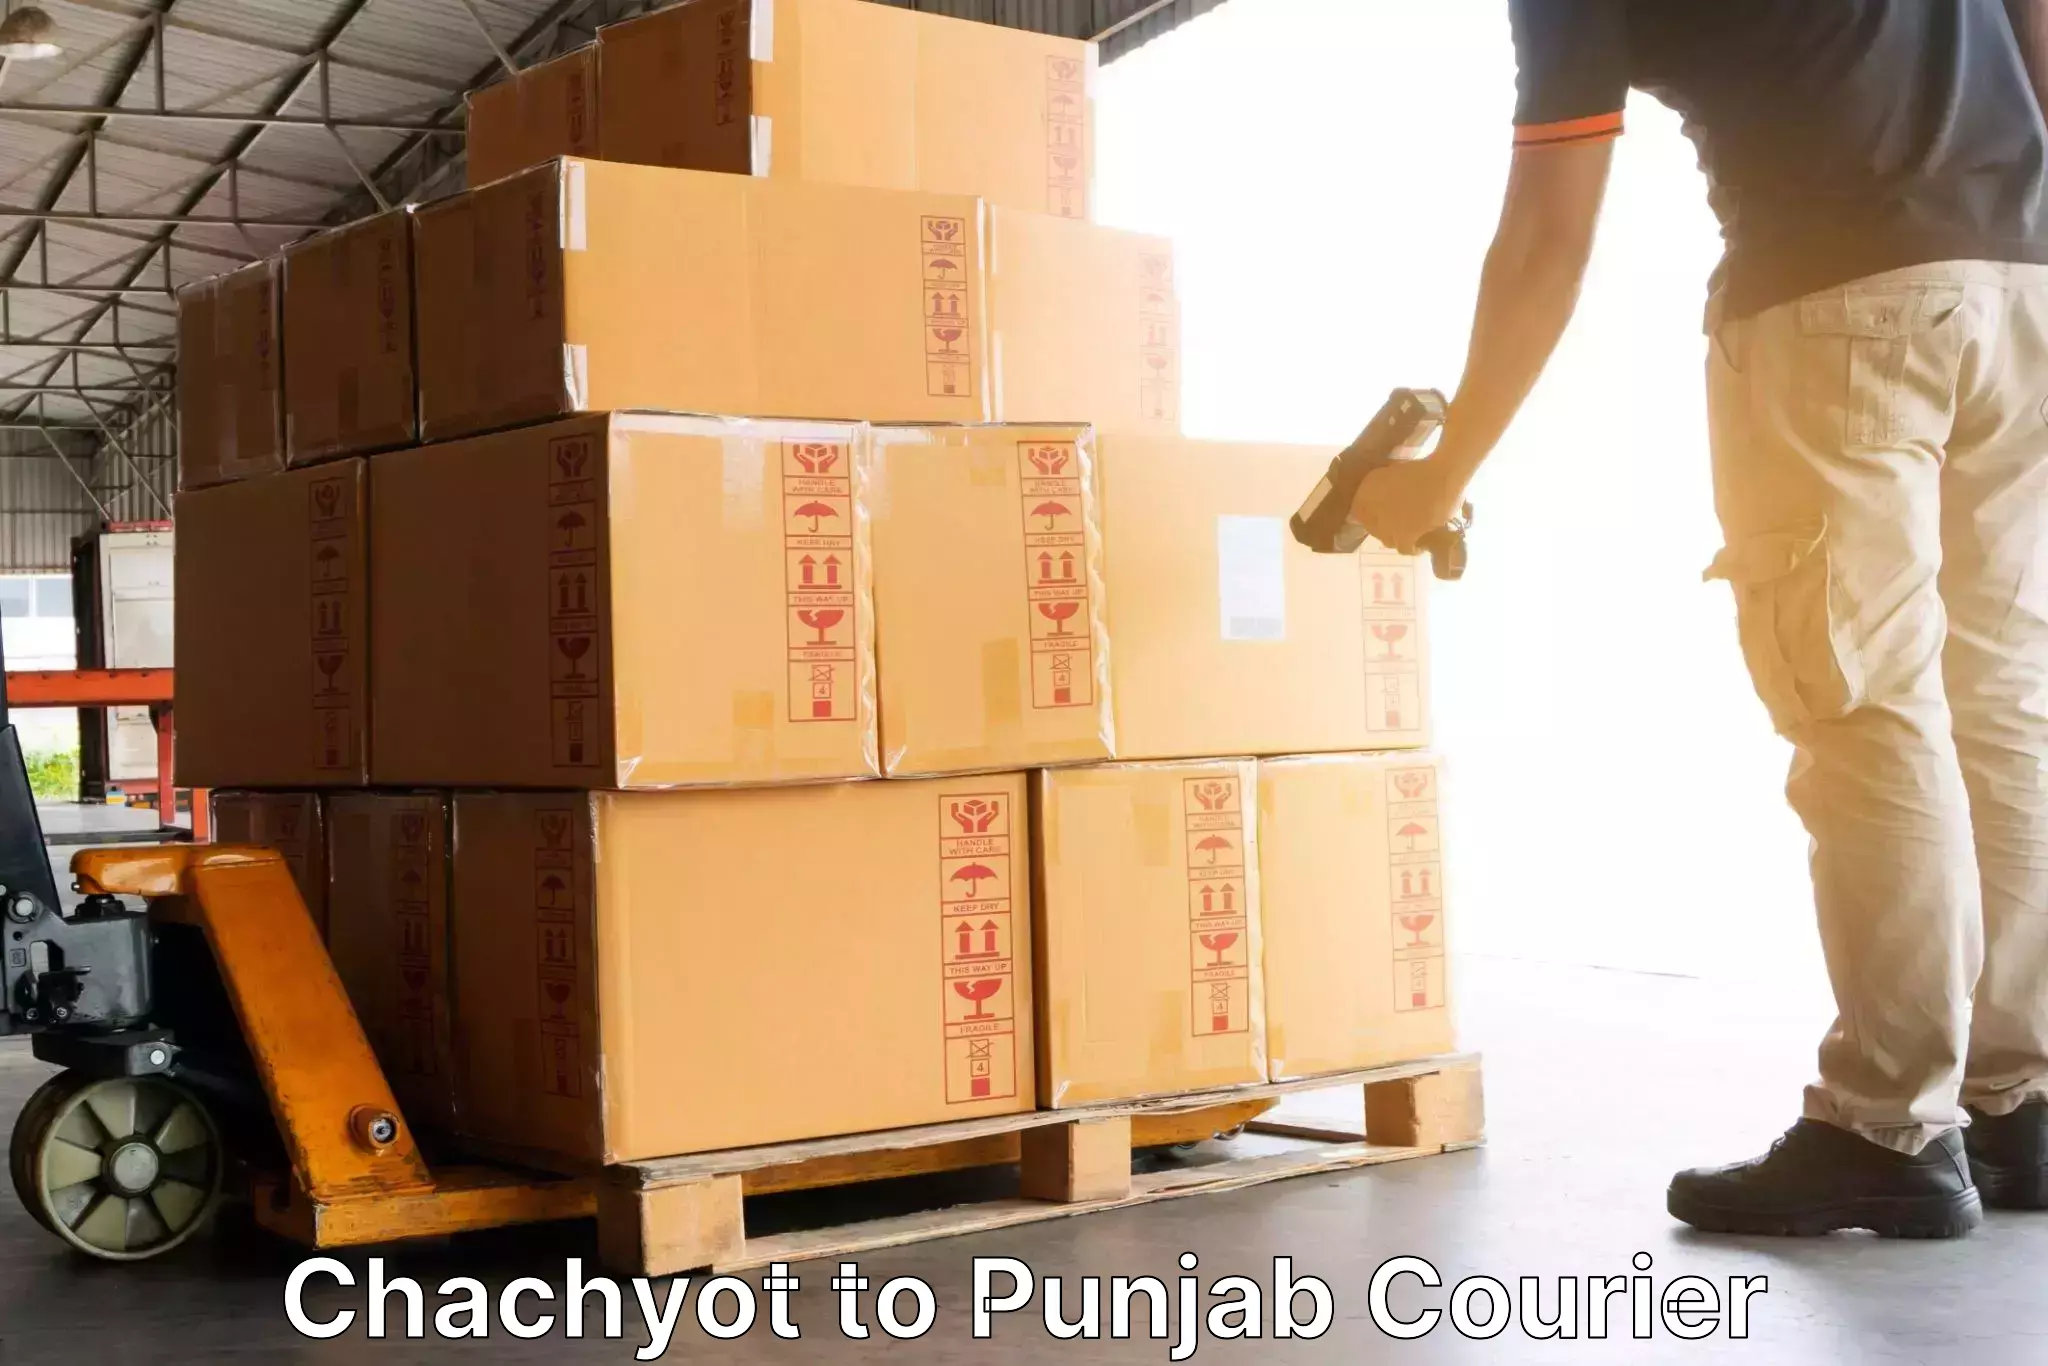 Advanced courier platforms Chachyot to Punjab